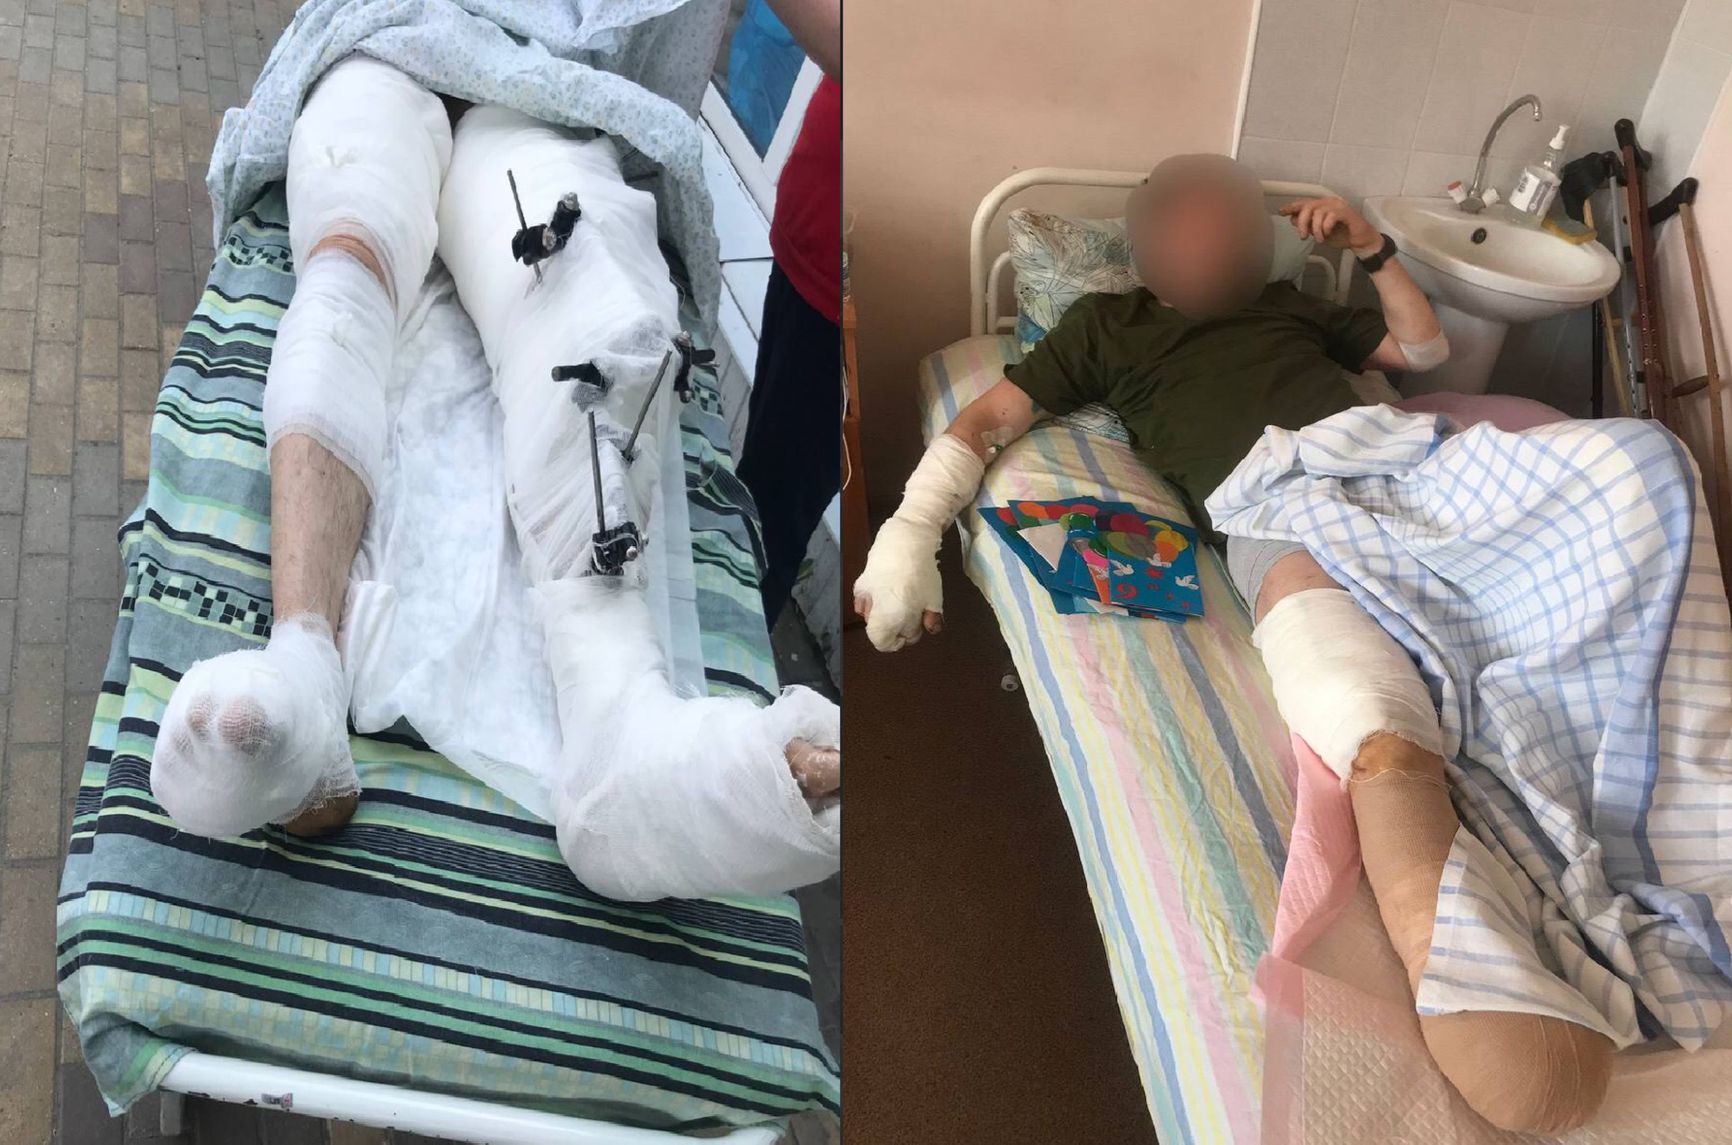 A military serviceman whose limbs were saved by doctors, and a serviceman with an amputated foot